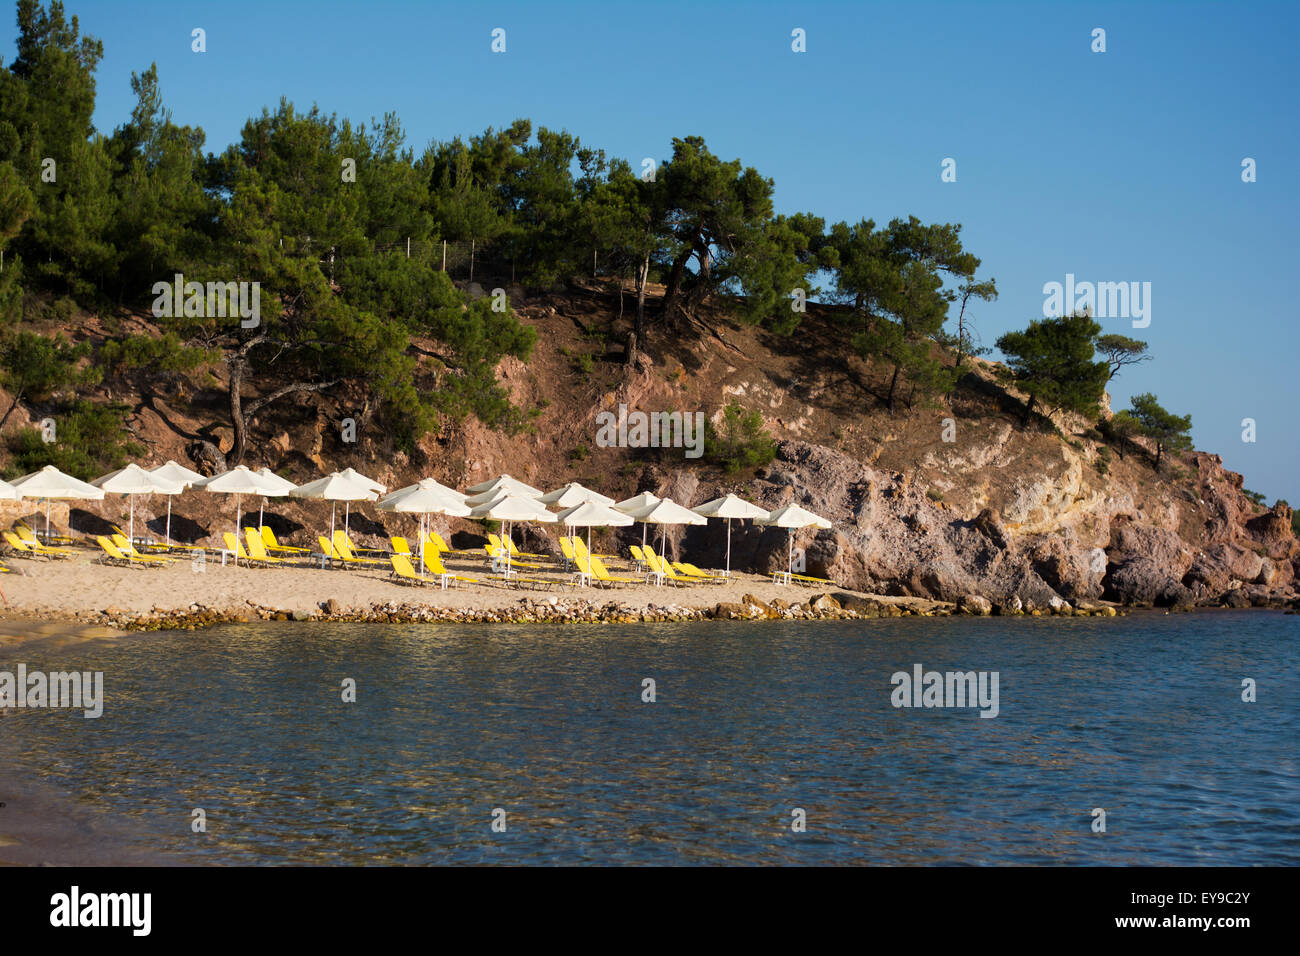 Thassos island, Greece, June 23, 2015: Nice organized beach Rosos Gremos with yellow sunbeds and umbrellas and crystal clear sea Stock Photo